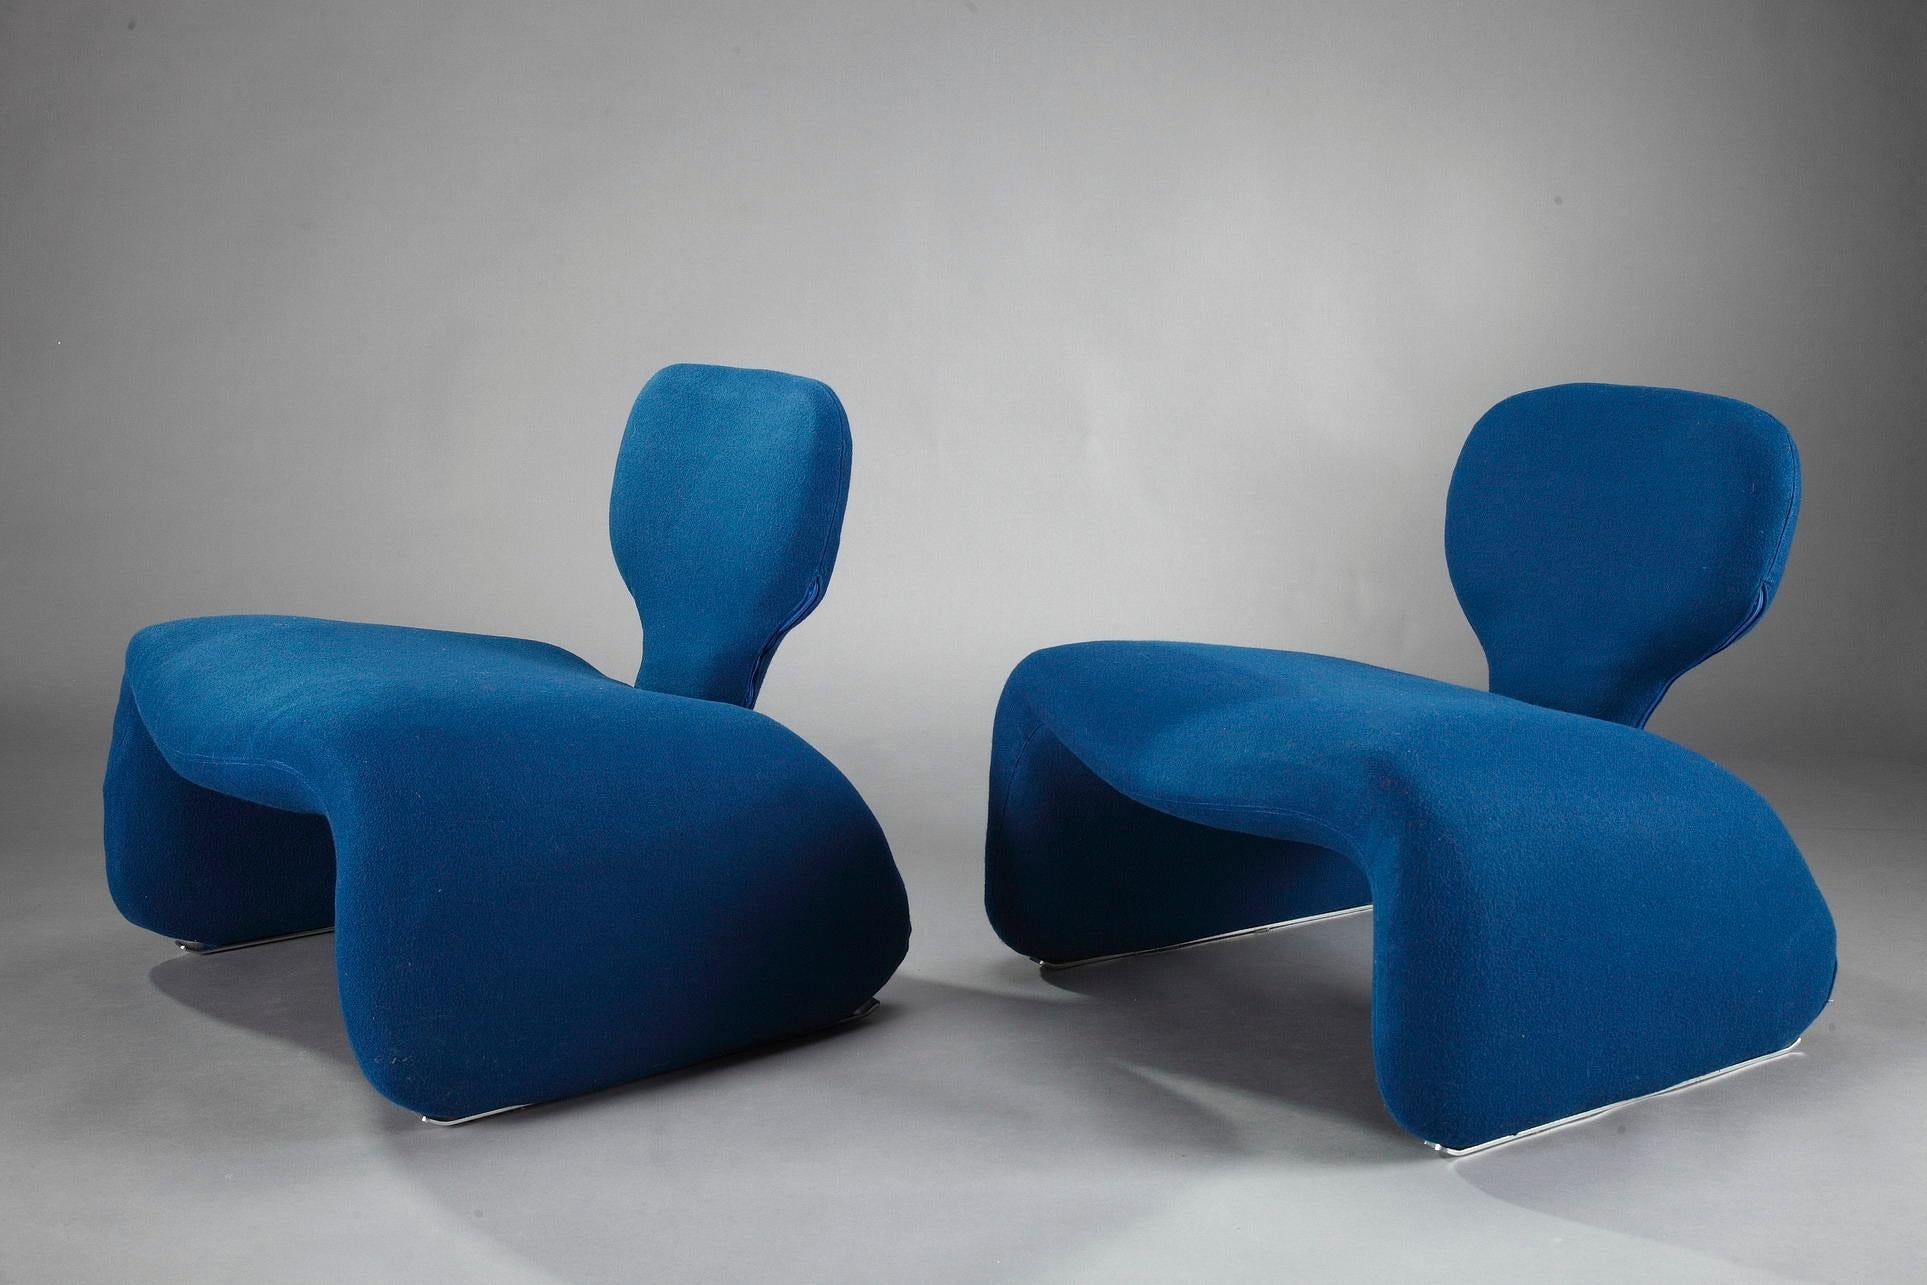 French Pair of Vintage Blue Djinn Chairs by Olivier Mourgue for Airborne